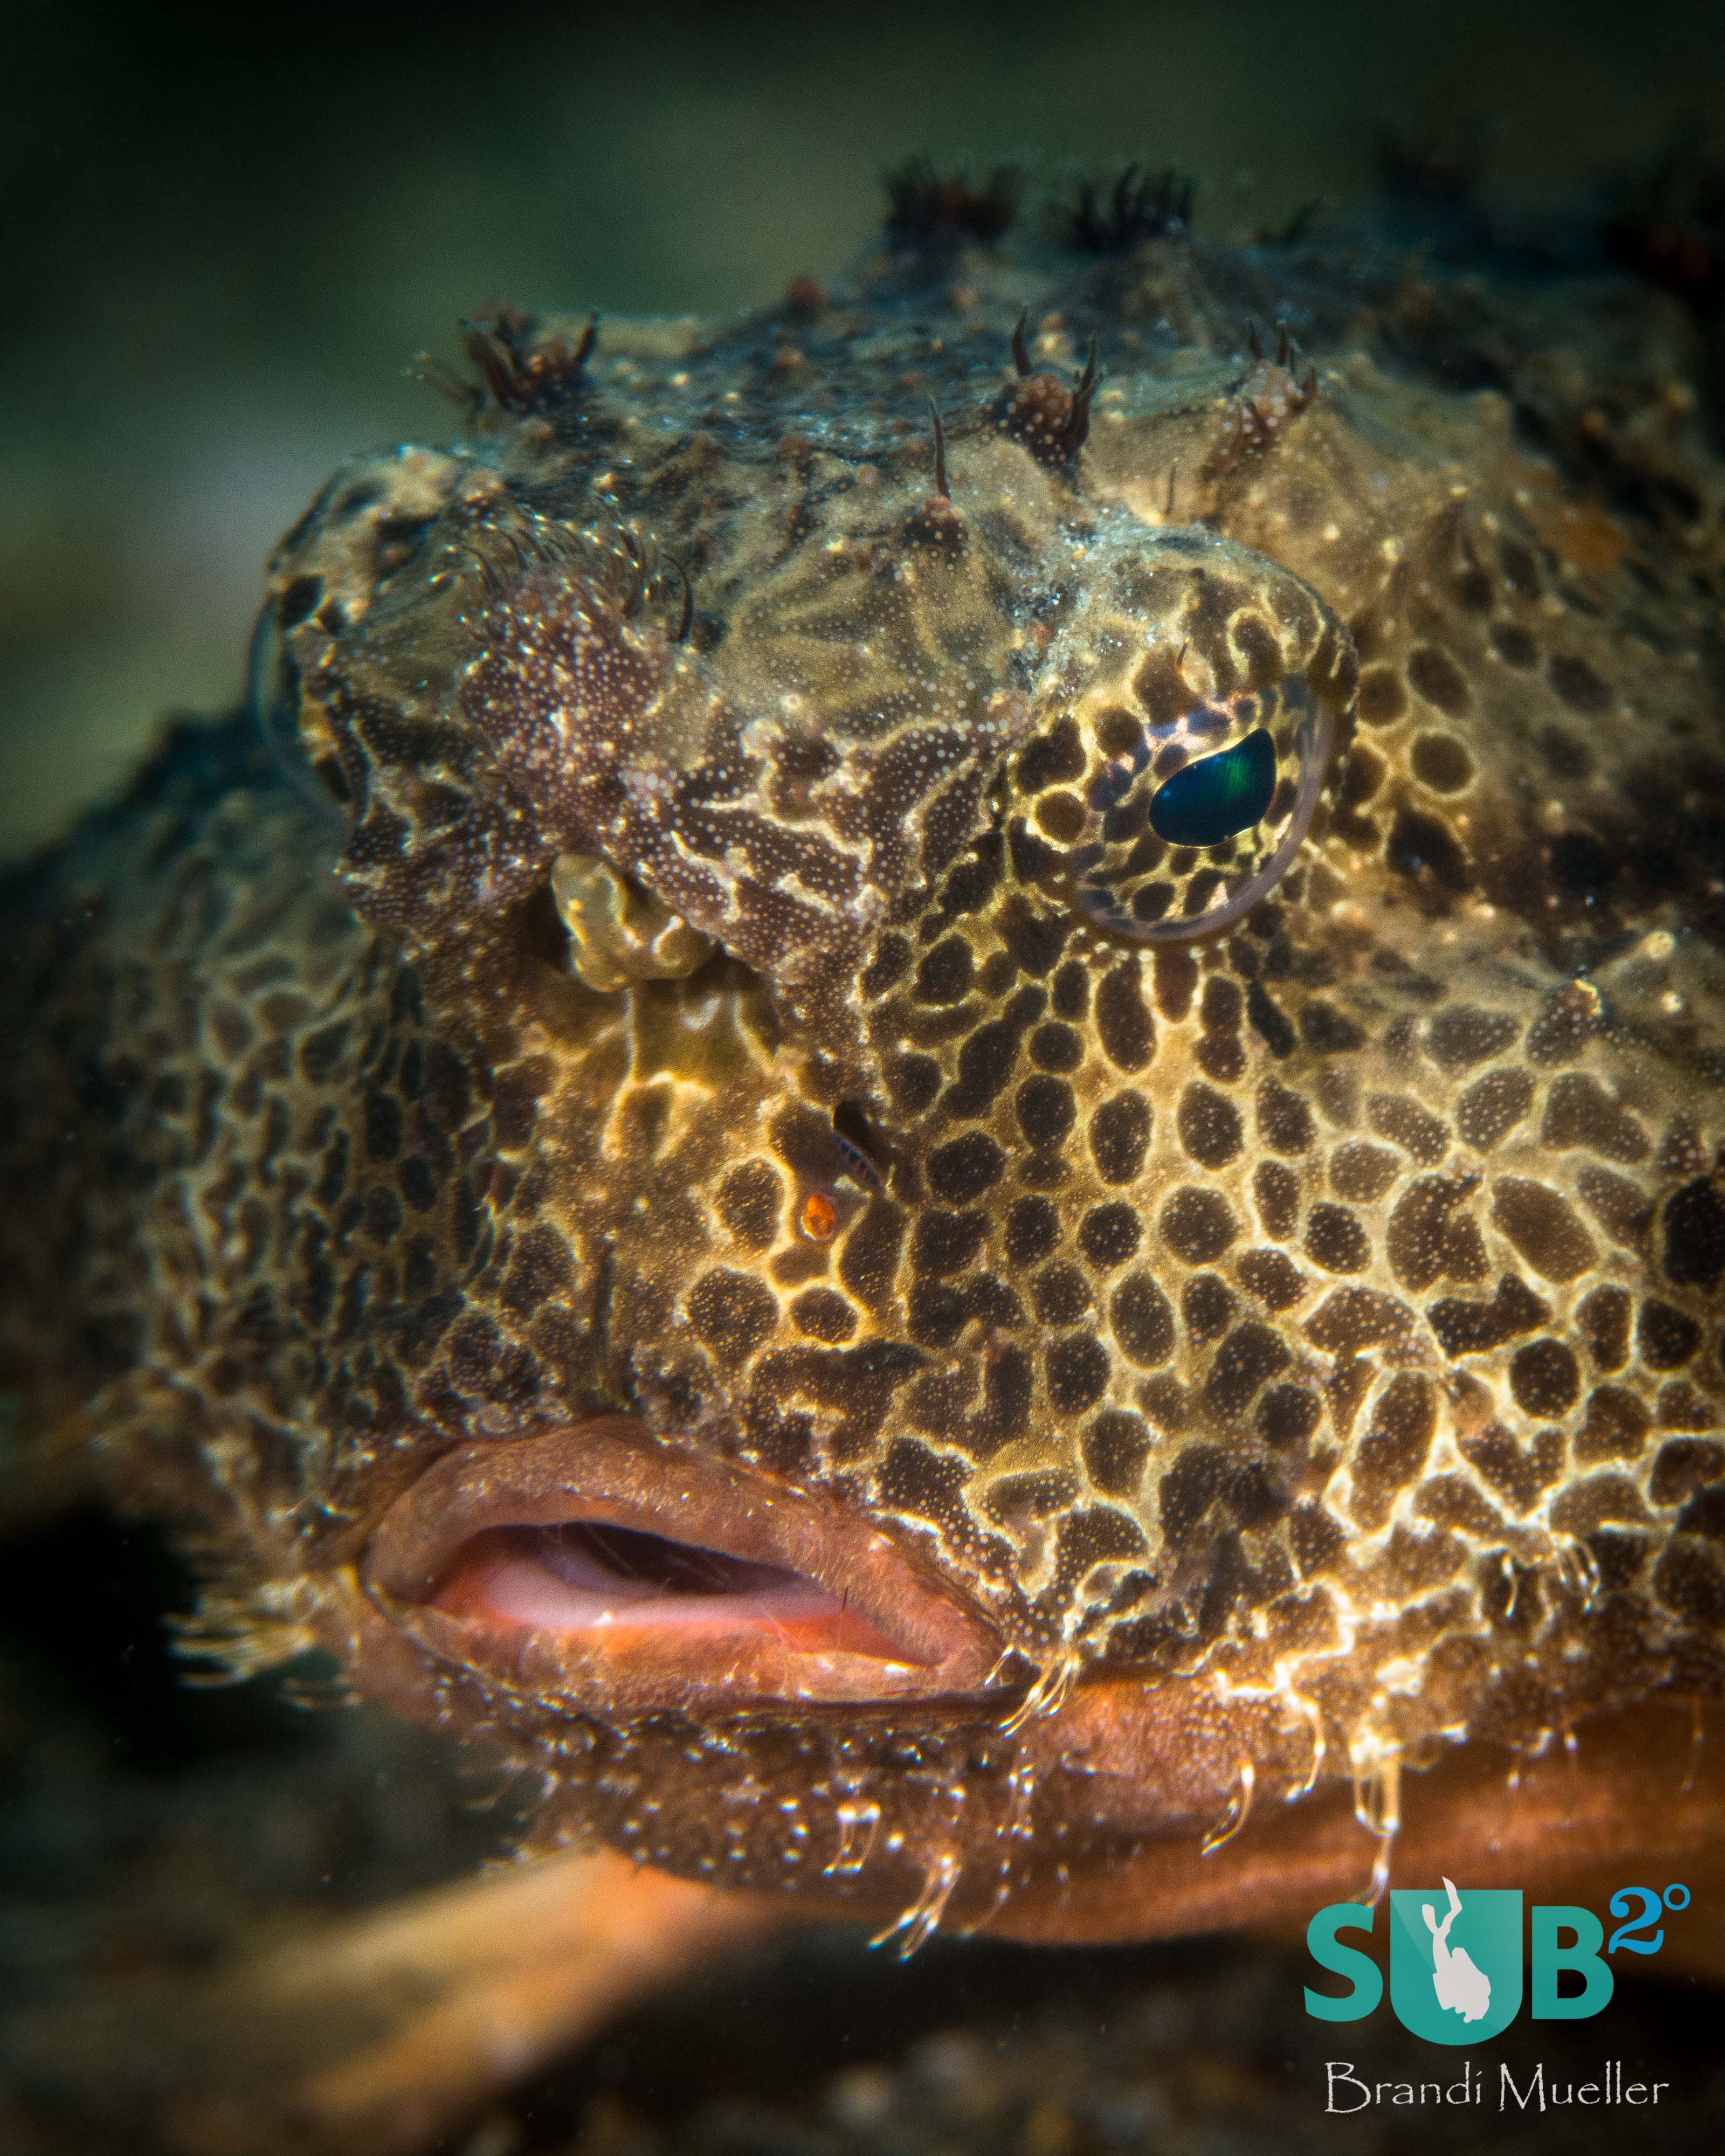 Batfish are one of the favorite finds in the muck under the bridge.